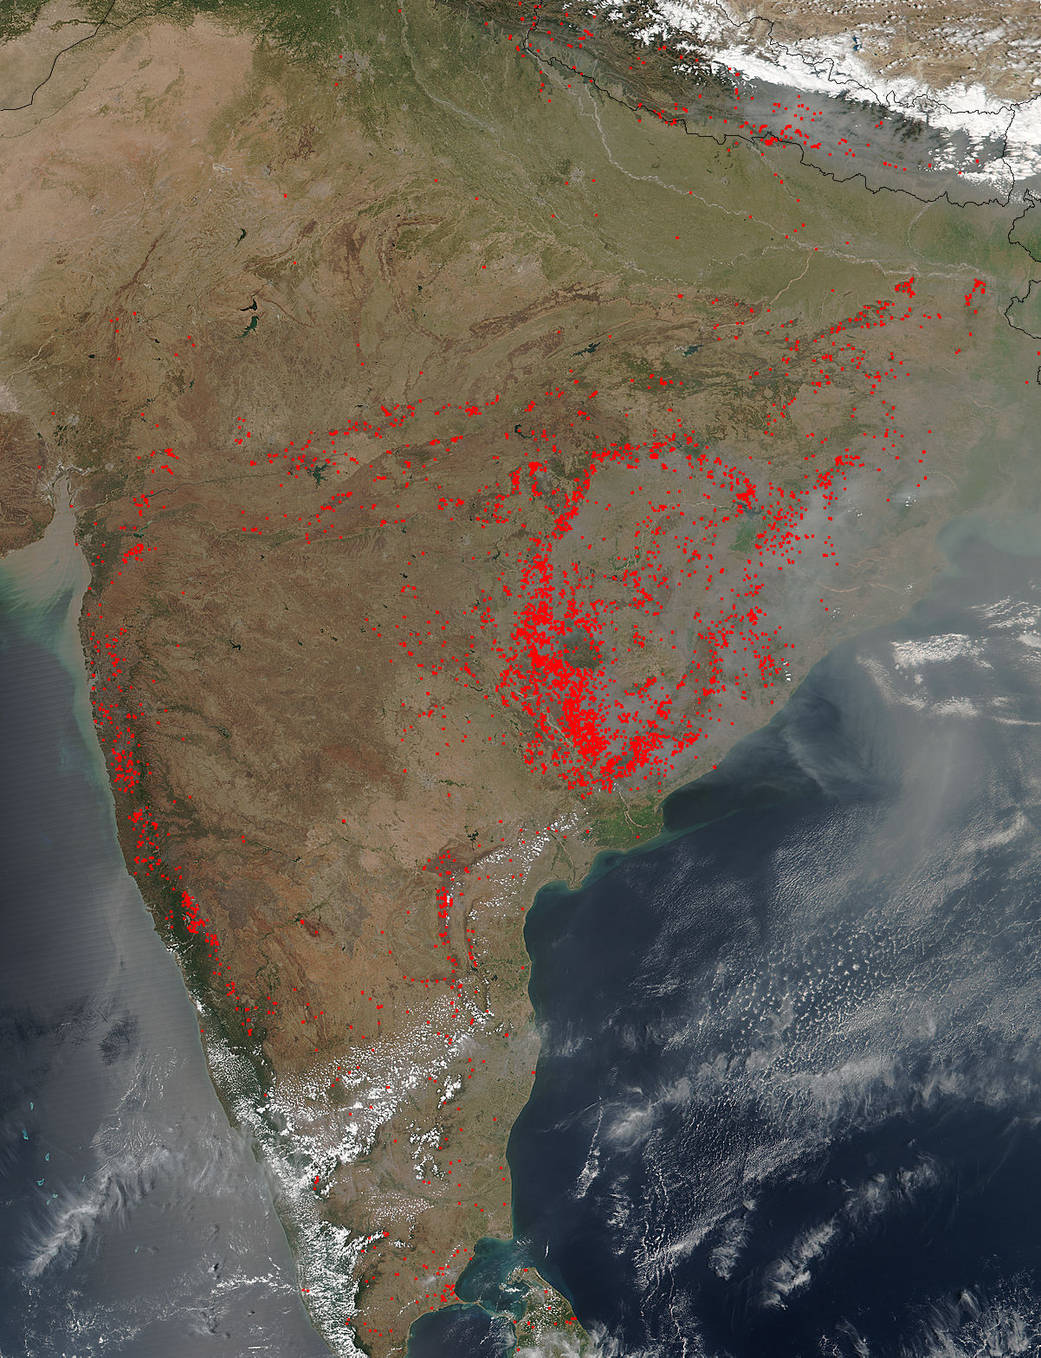 Fires in India